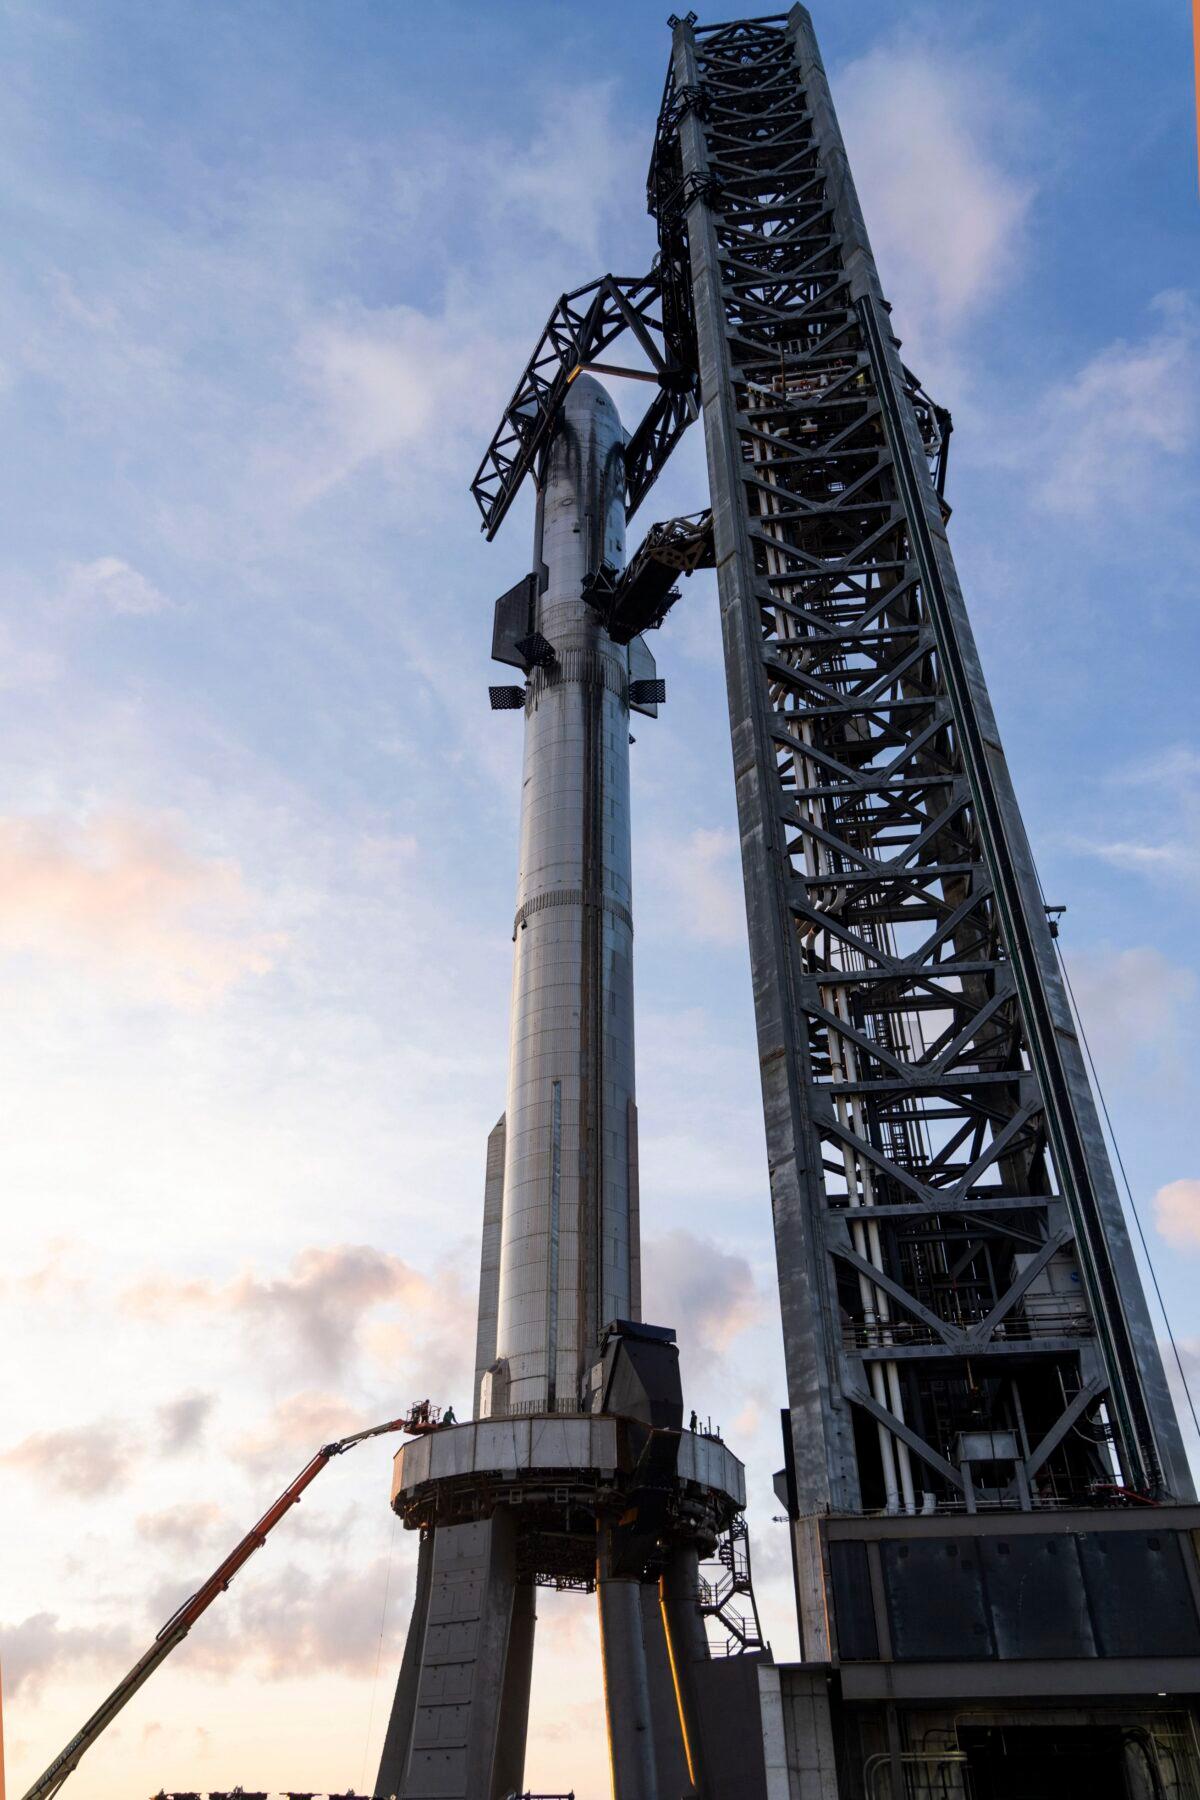 SpaceX's Starship rocket at the launch site in Boca Chica, Texas, on April 12, 2023. (SpaceX via AP)